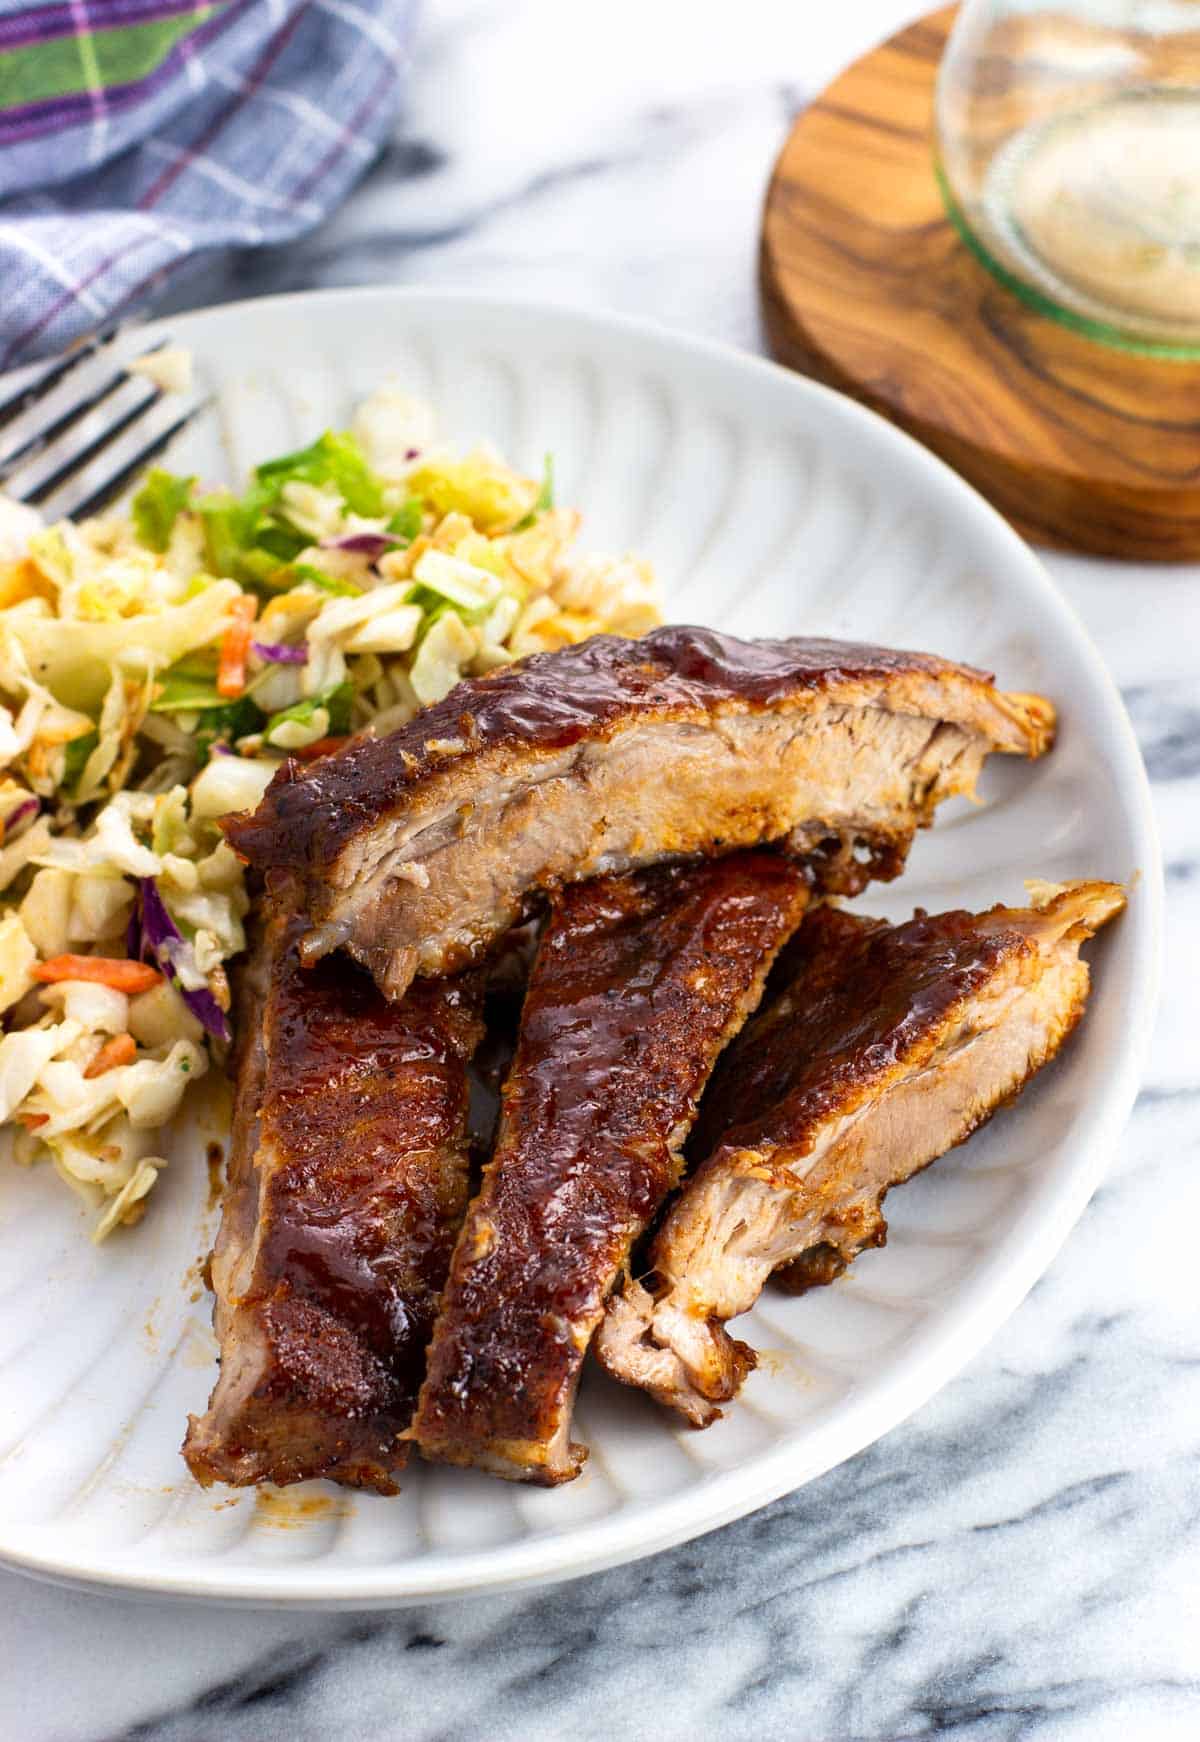 BBQ sauced ribs on a plate with salad.